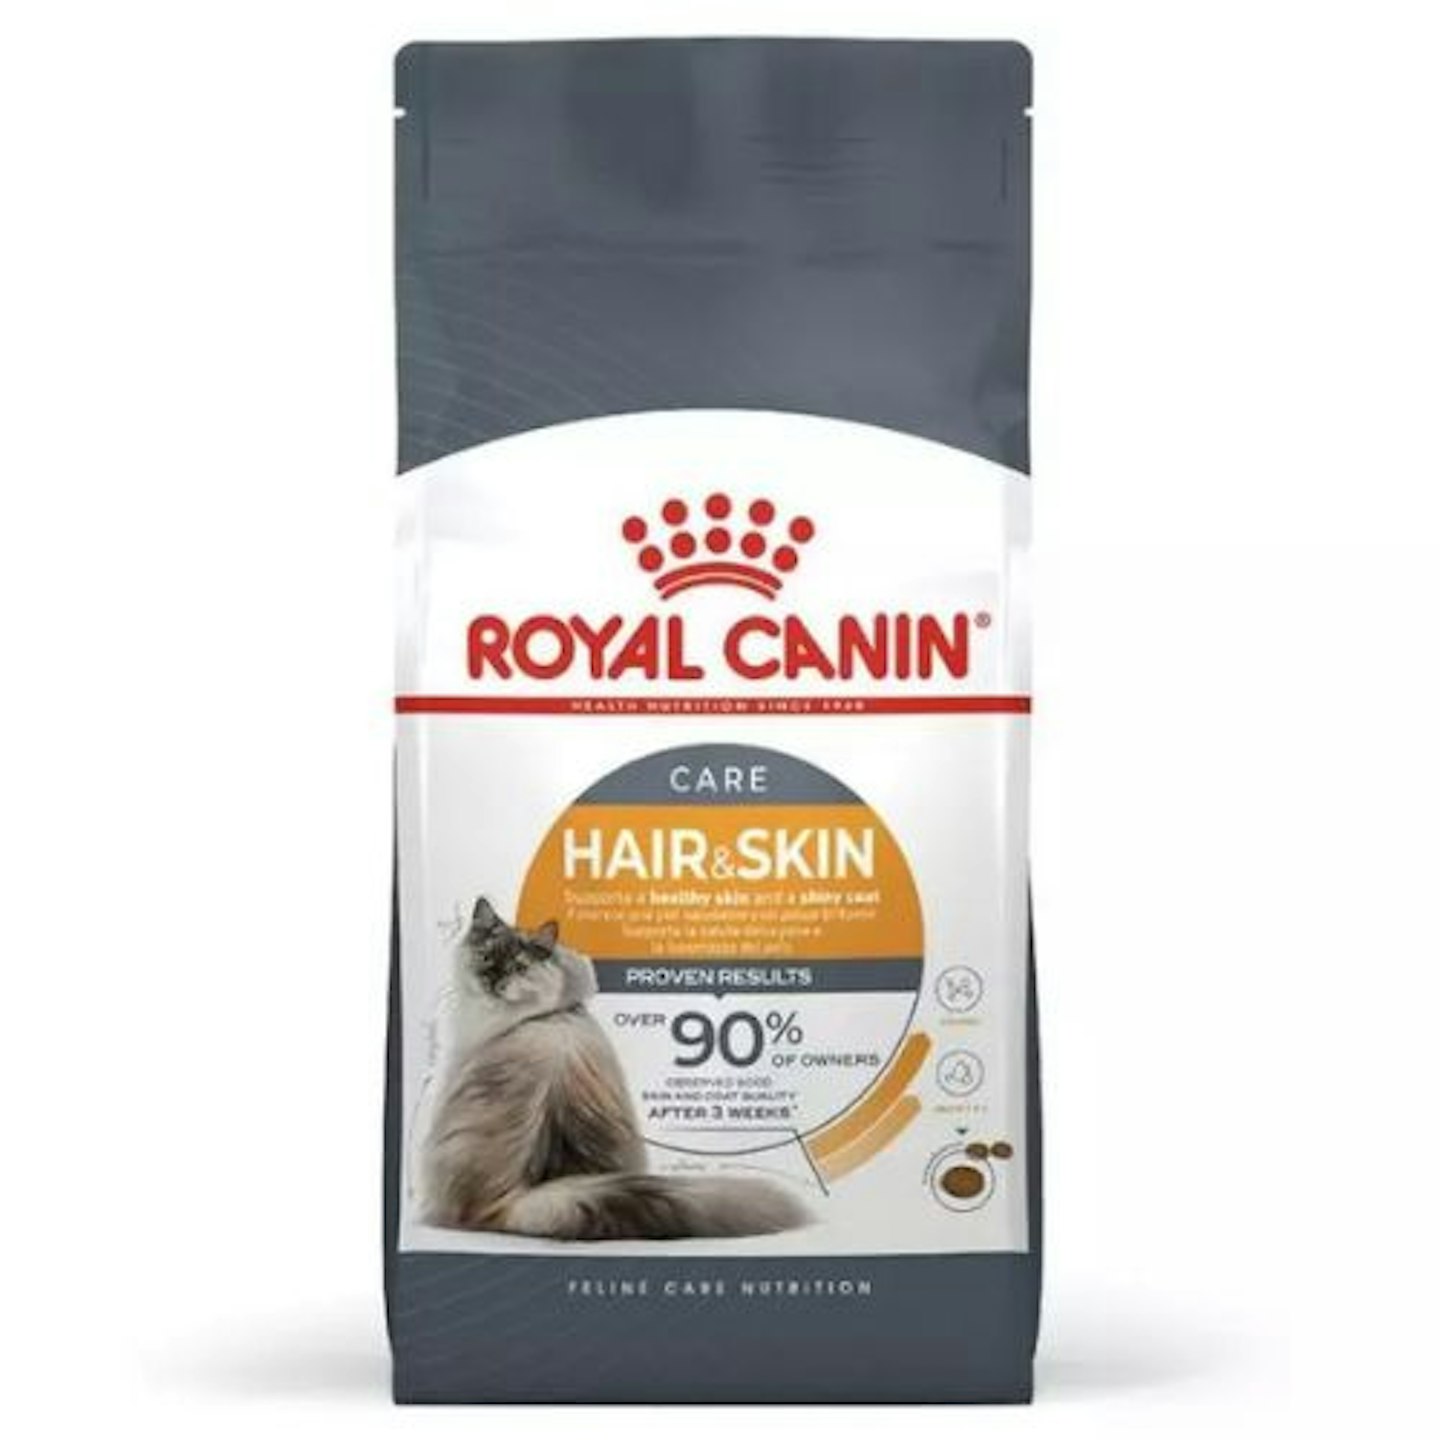 Royal Canin Hair and Skin Care Adult Dry Cat Food